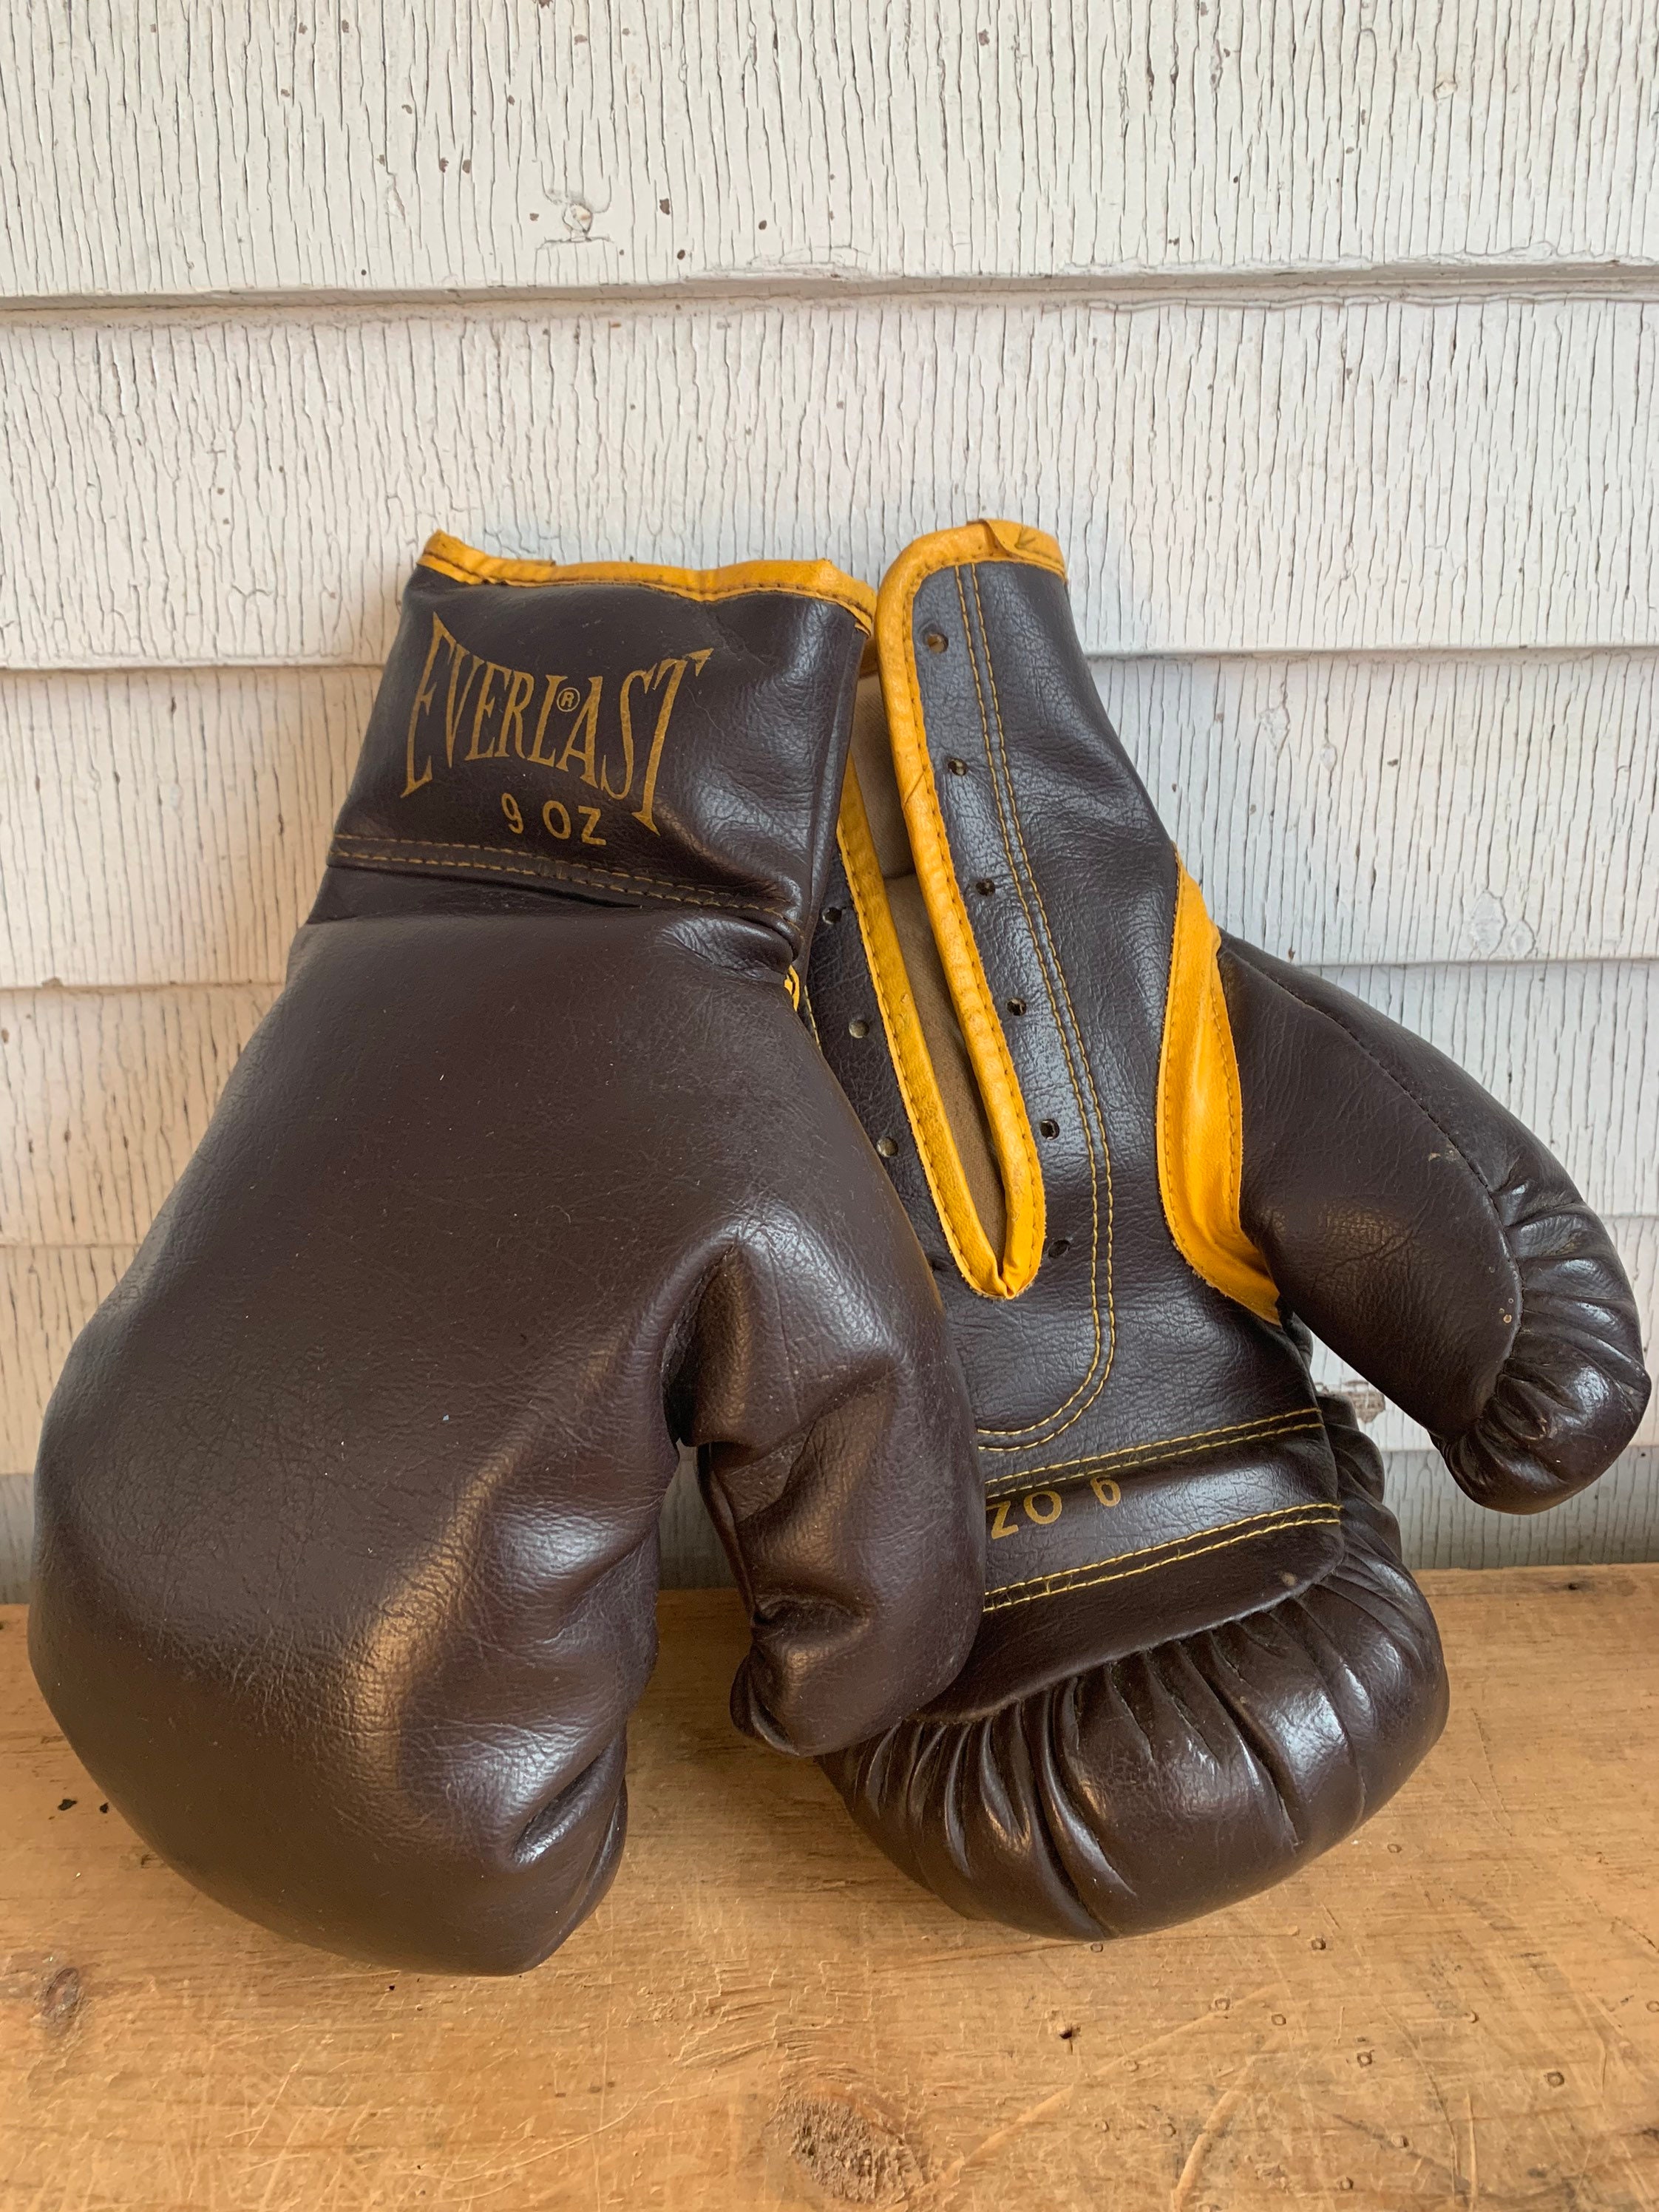 1960s Everlast Boxing Gloves Brown Yellow - Etsy